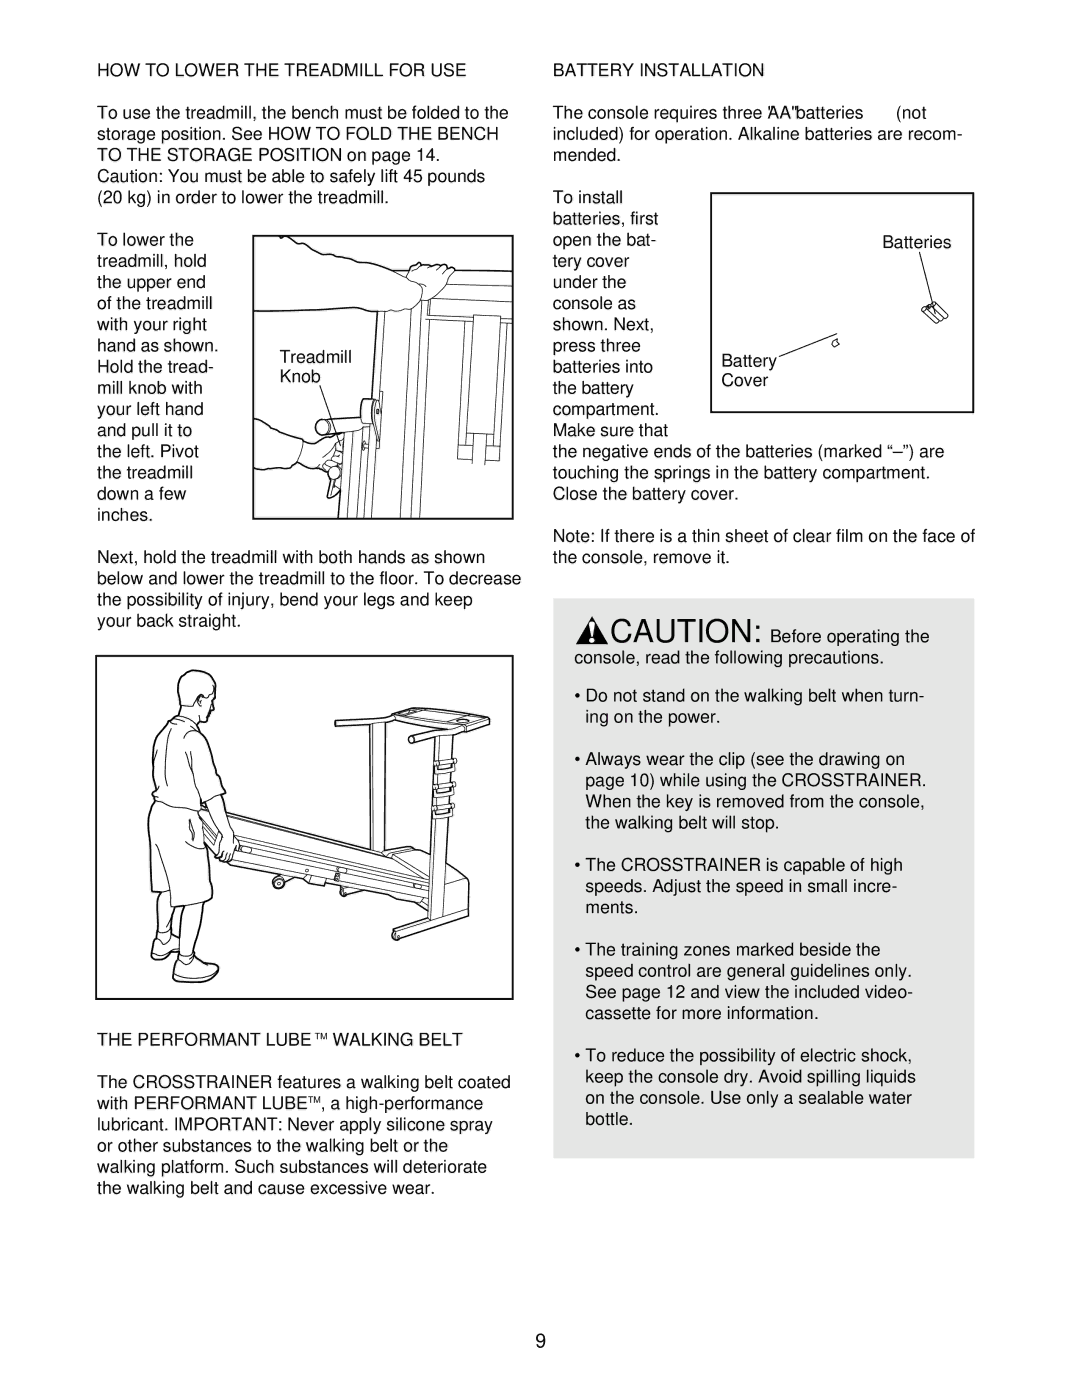 ProForm 831.297460 user manual HOW to Lower the Treadmill for USE, Performant Lubetm Walking Belt, Battery Installation 